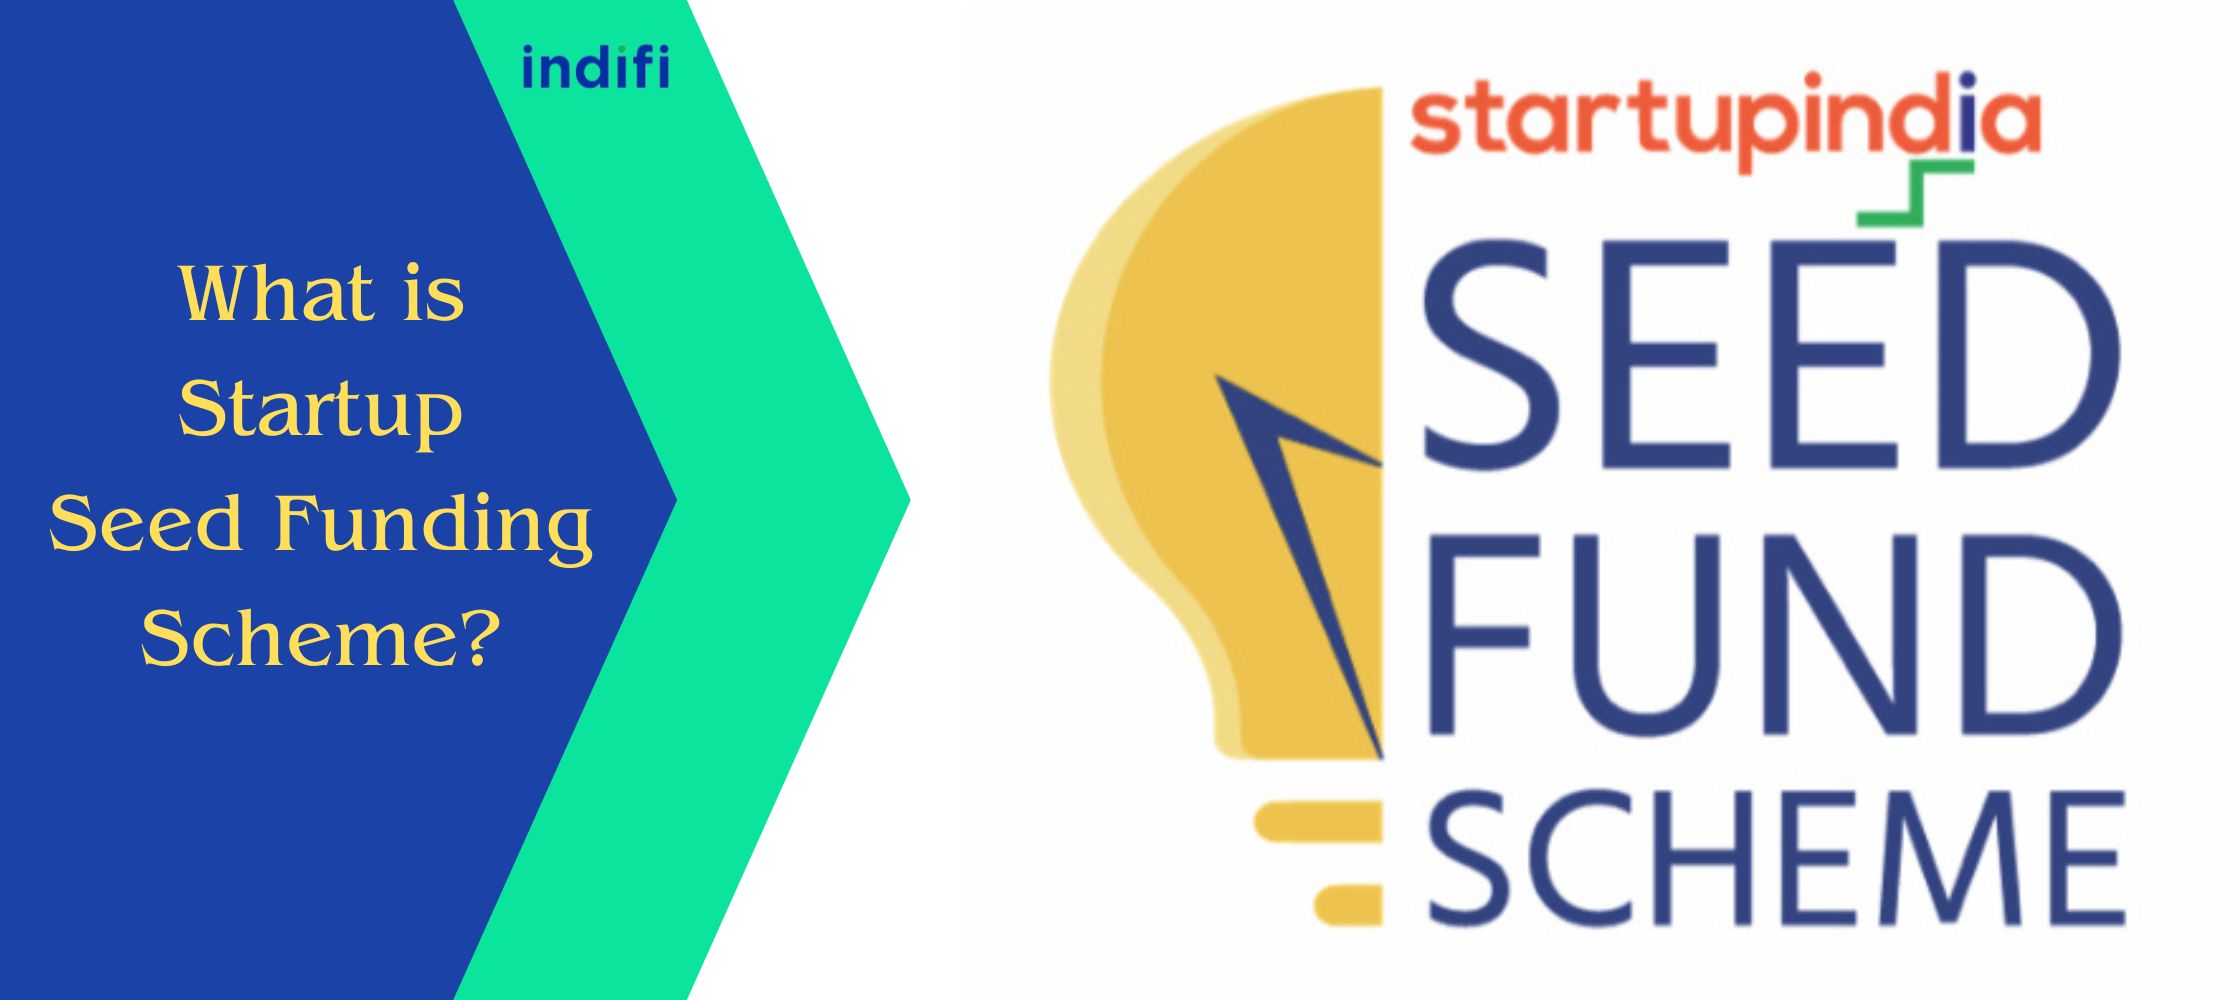 What is Startup Seed Funding Scheme?